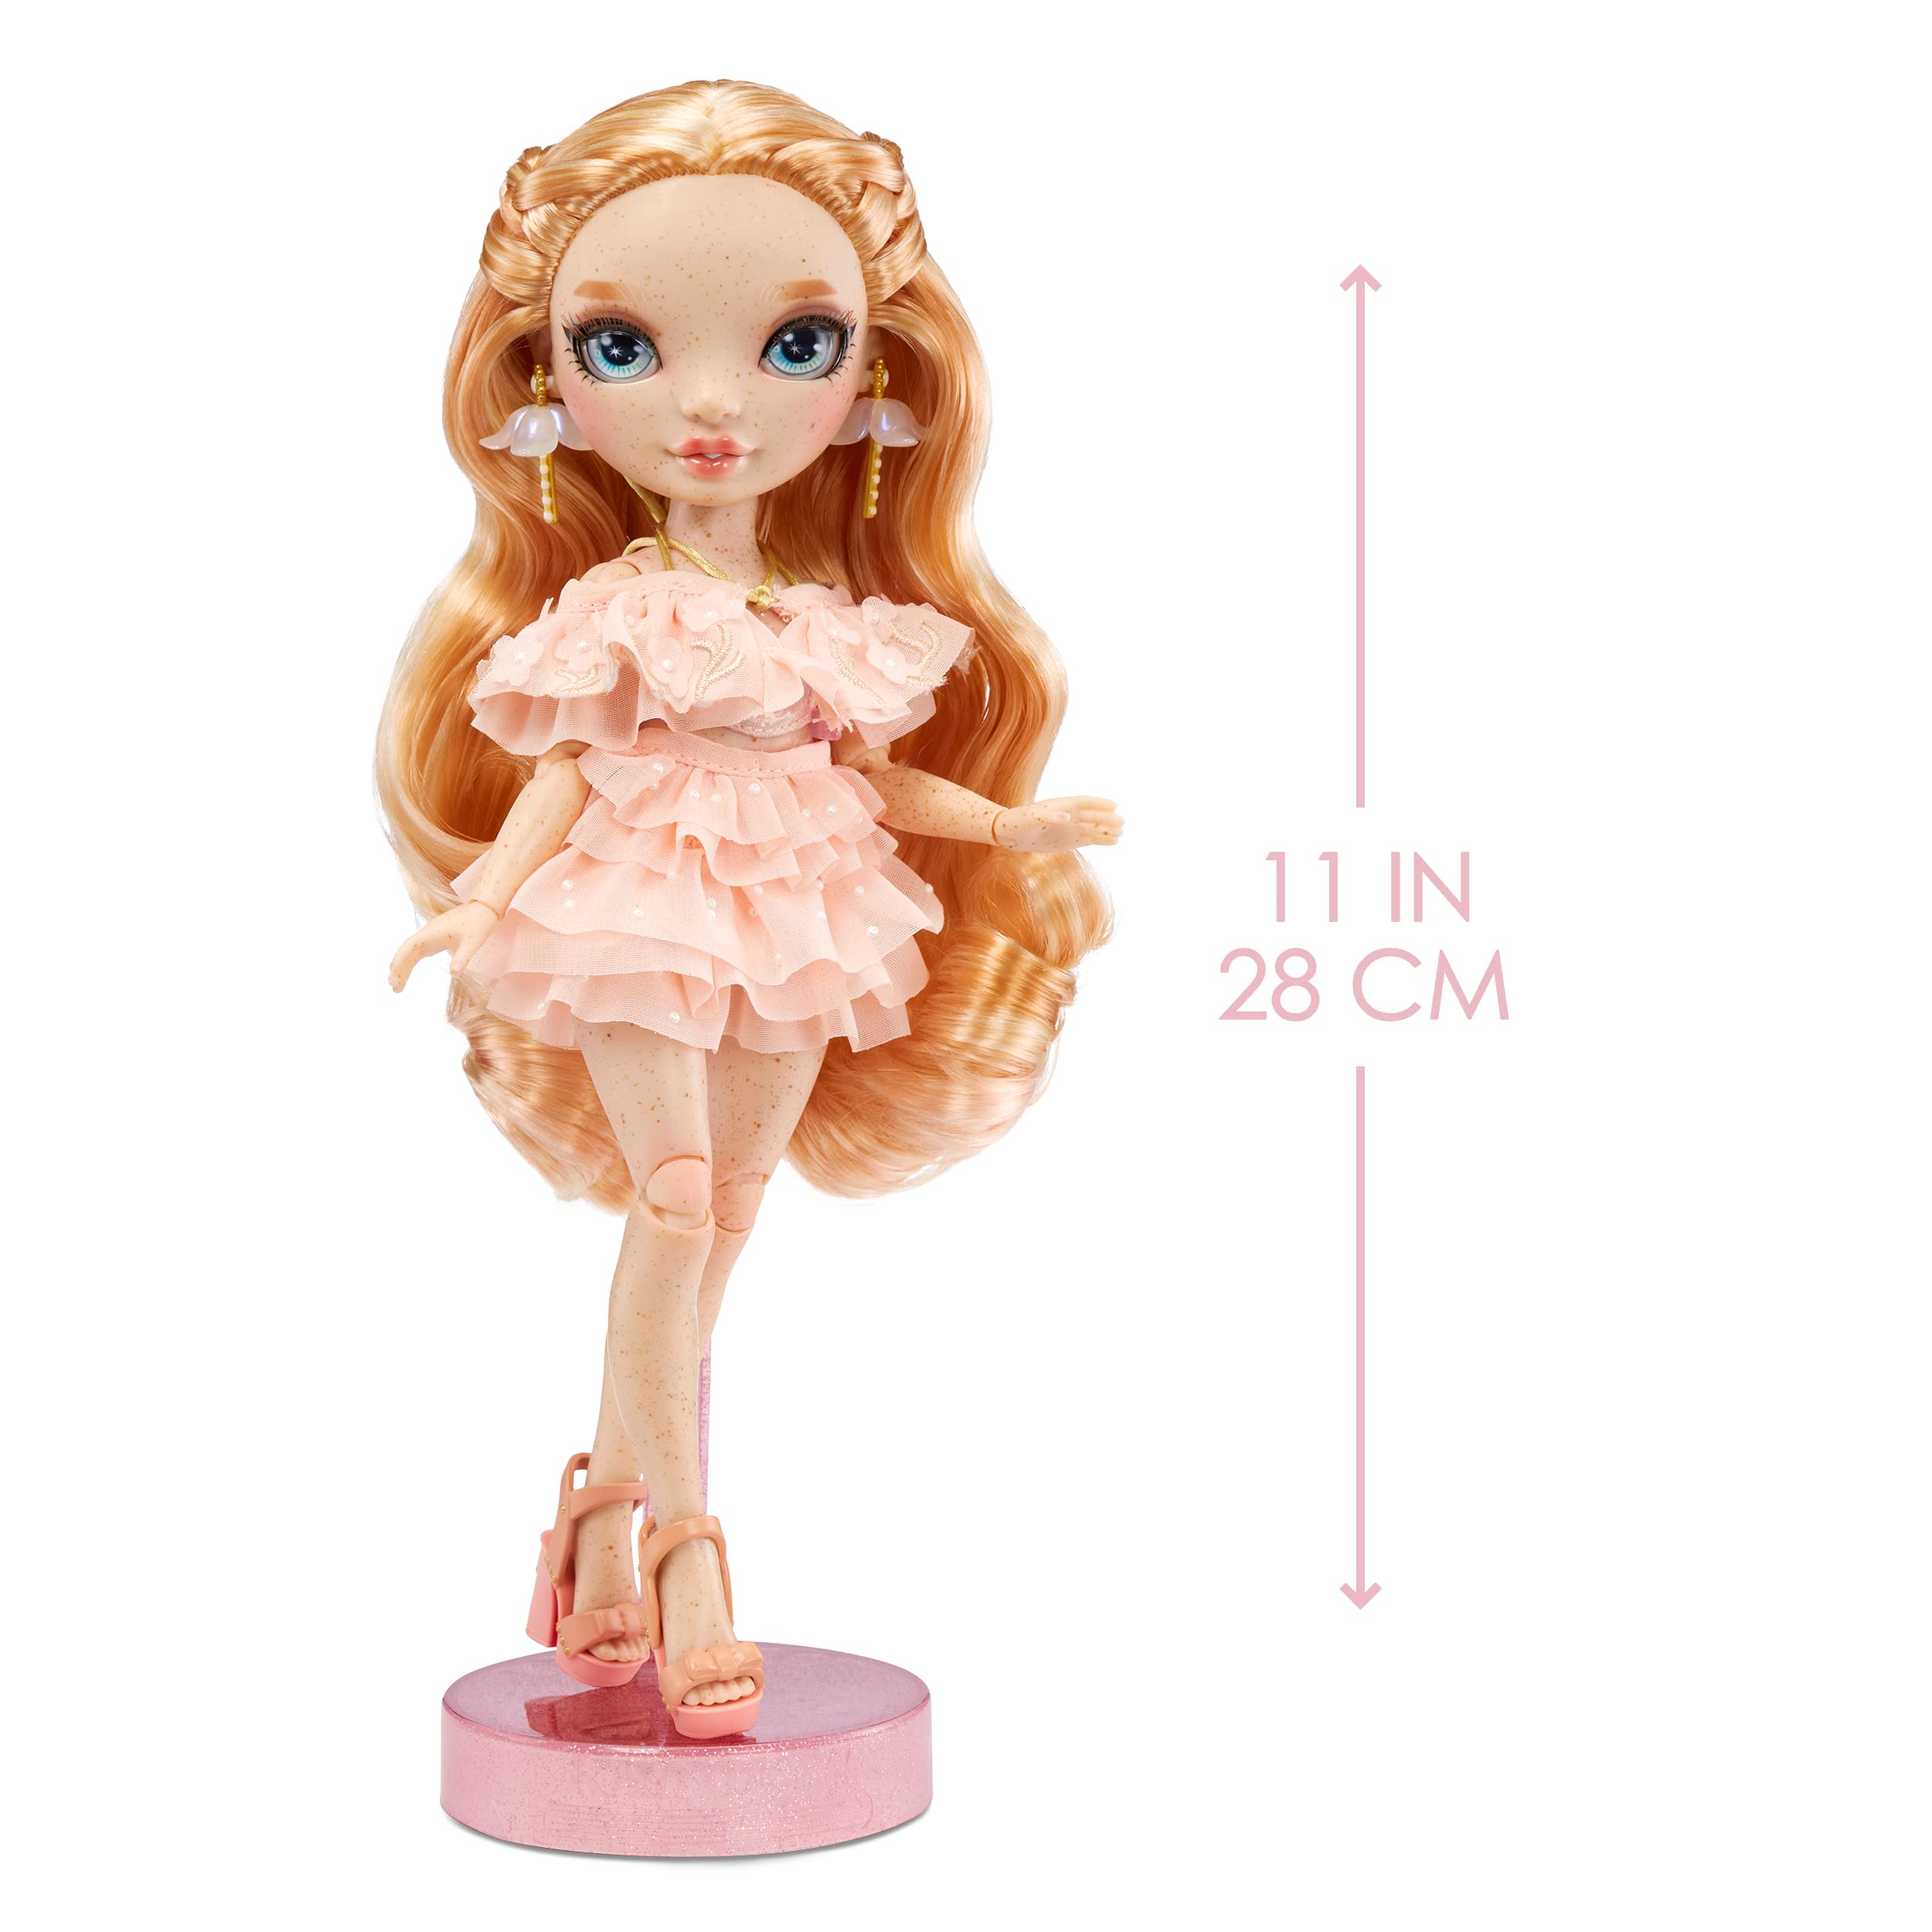 Rainbow High Victoria- Light Pink Fashion Doll and Freckles from Head to Toe. Fashionable Outfit & 10+ Colorful Play Accessories. Great Gift for Kids 4-12 Years Old and Collectors.